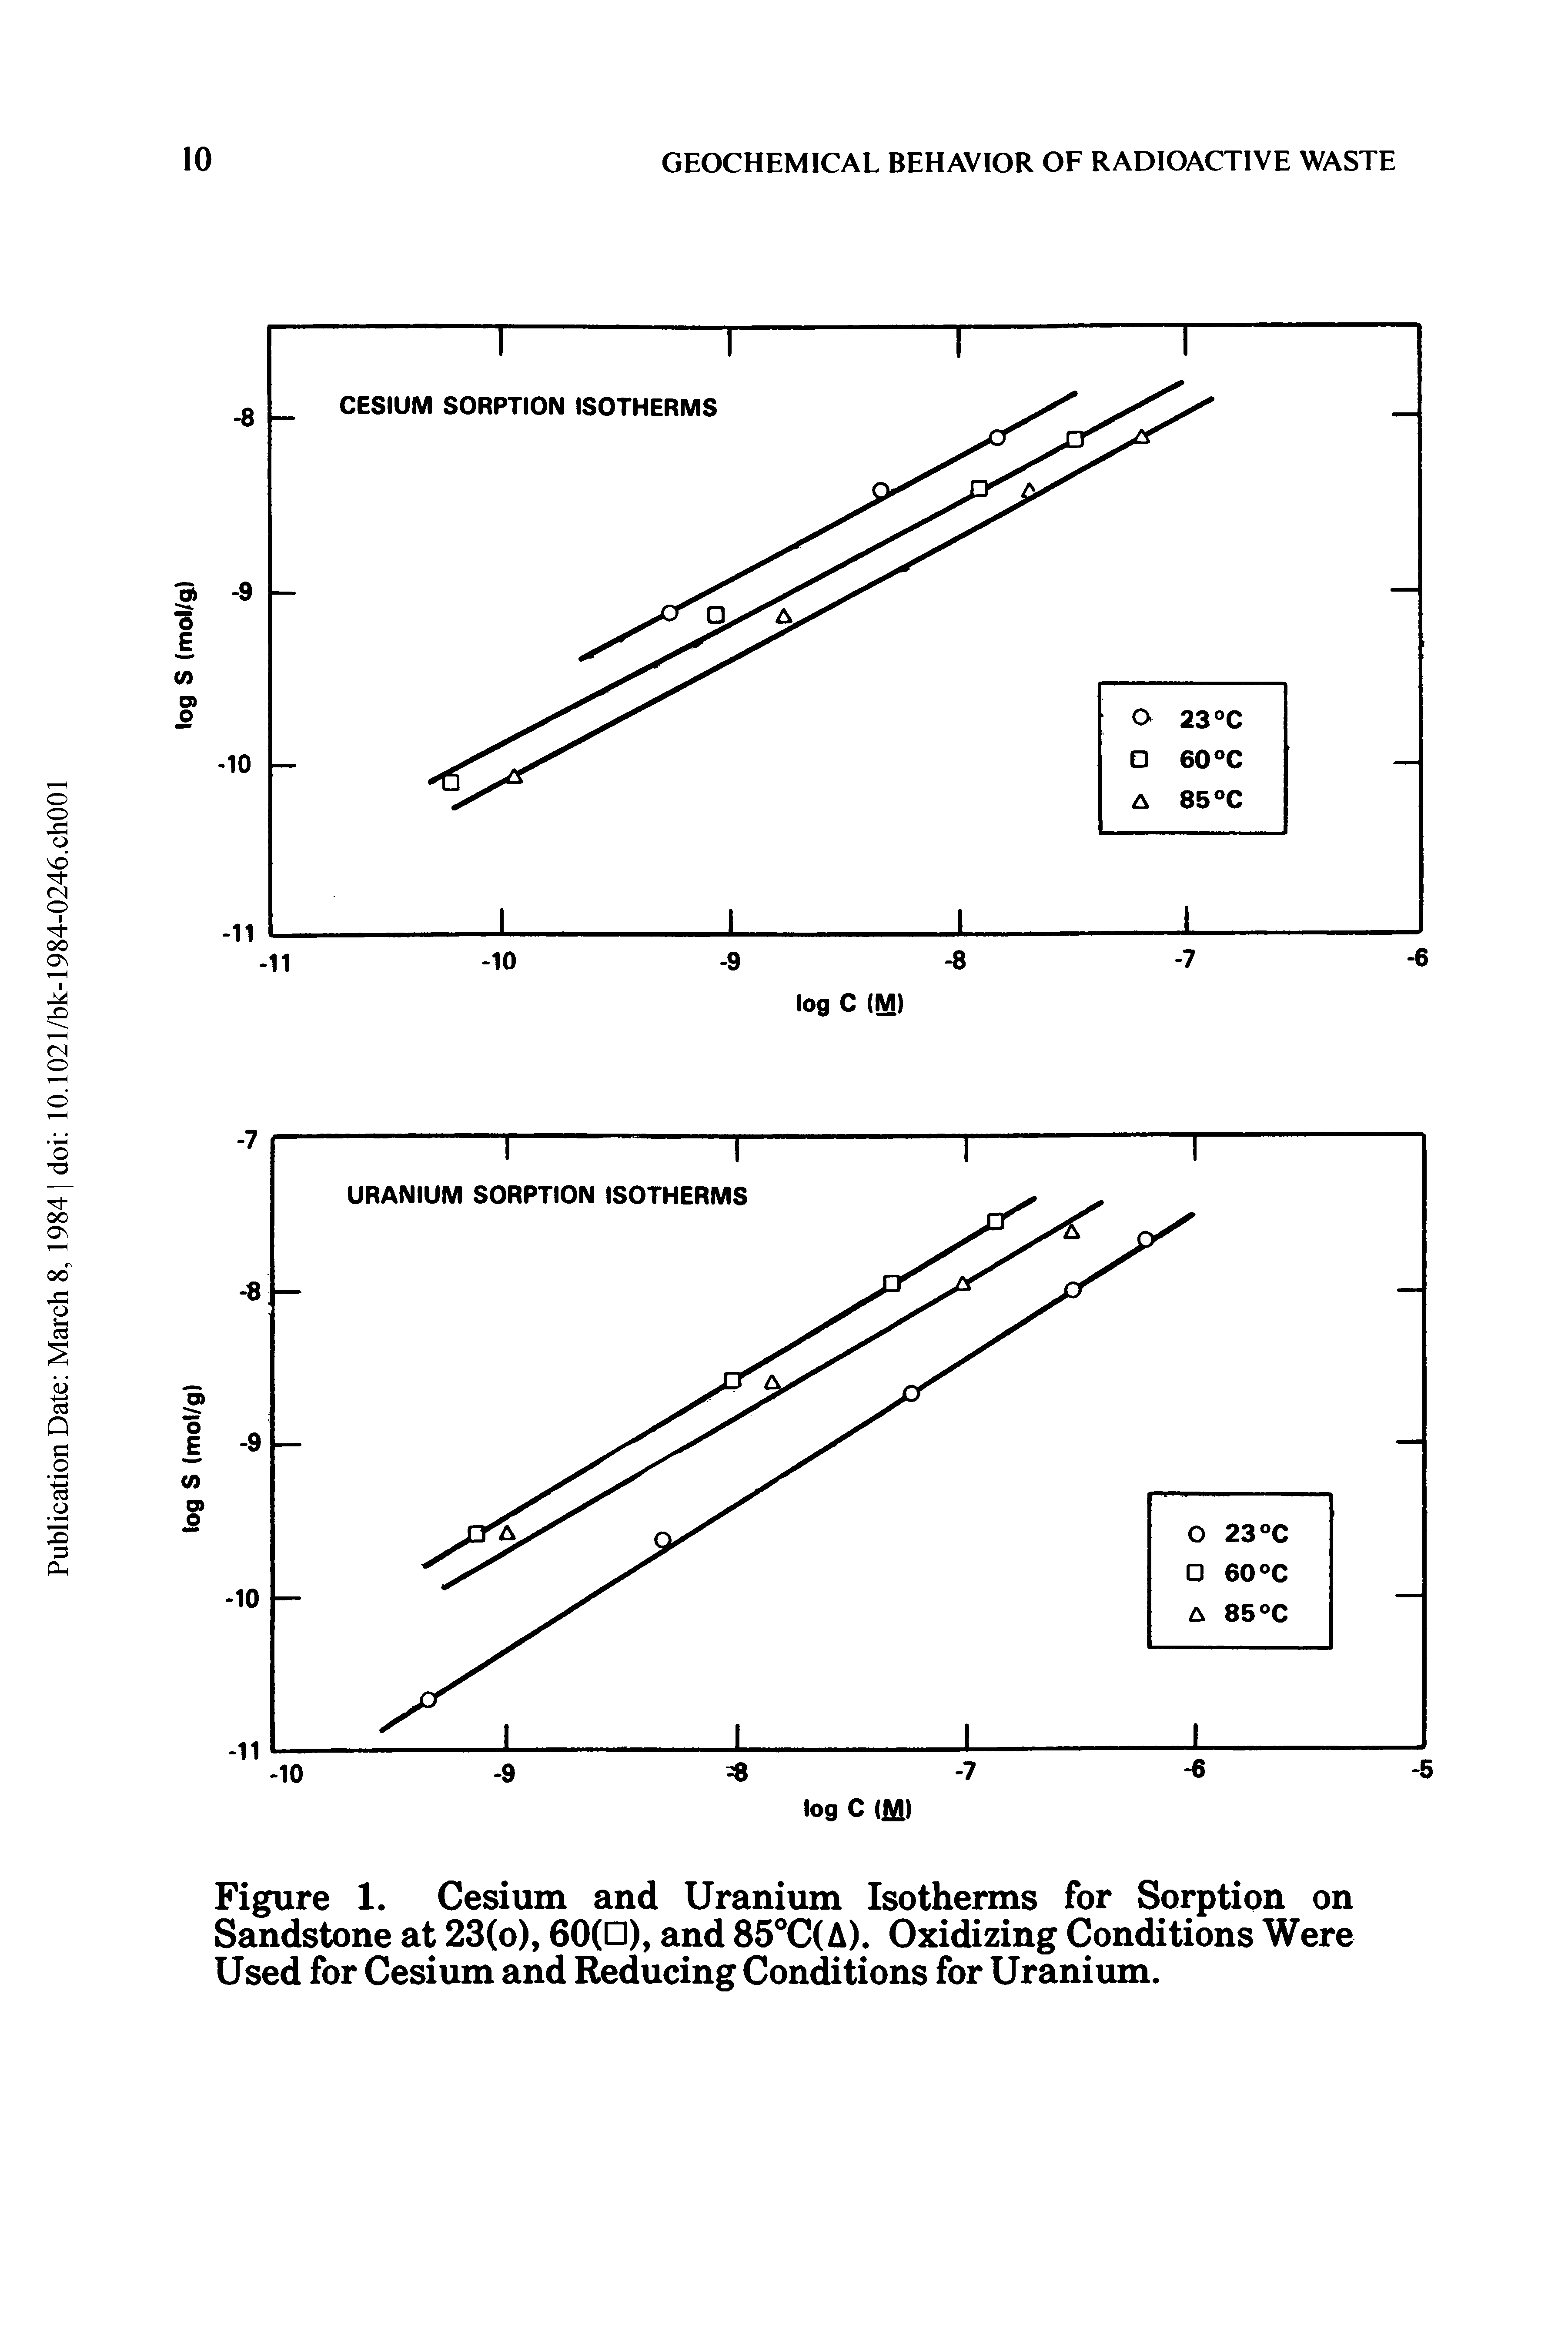 Figure 1. Cesium and Uranium Isotherms for Sorption on Sandstone at 23(o), 60(D), and 85°C(A). Oxidizing Conditions Were Used for Cesium and Reducing Conditions for Uranium.